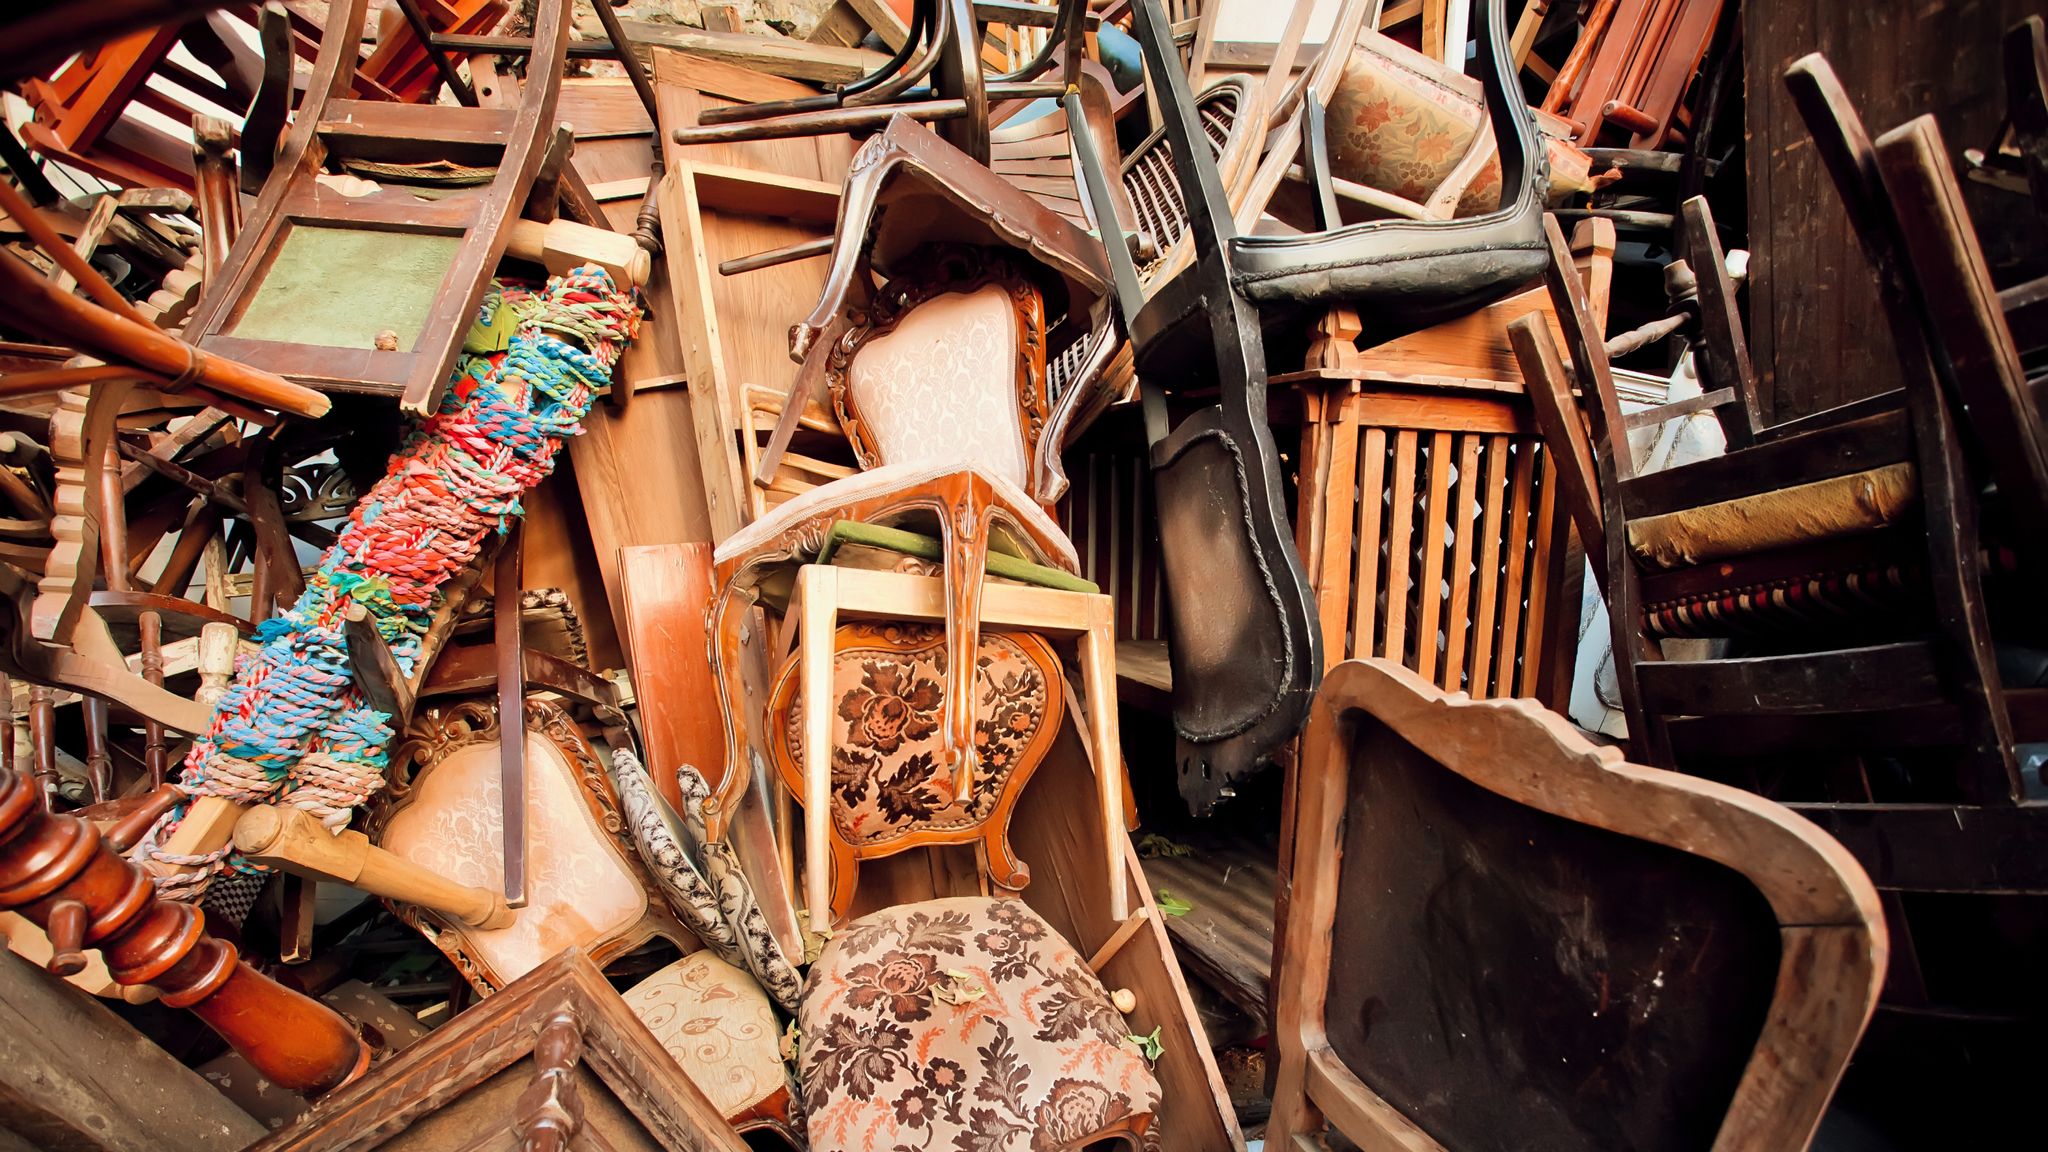 We Throw Away Millions Of Items That Could Be Repaired Uk News